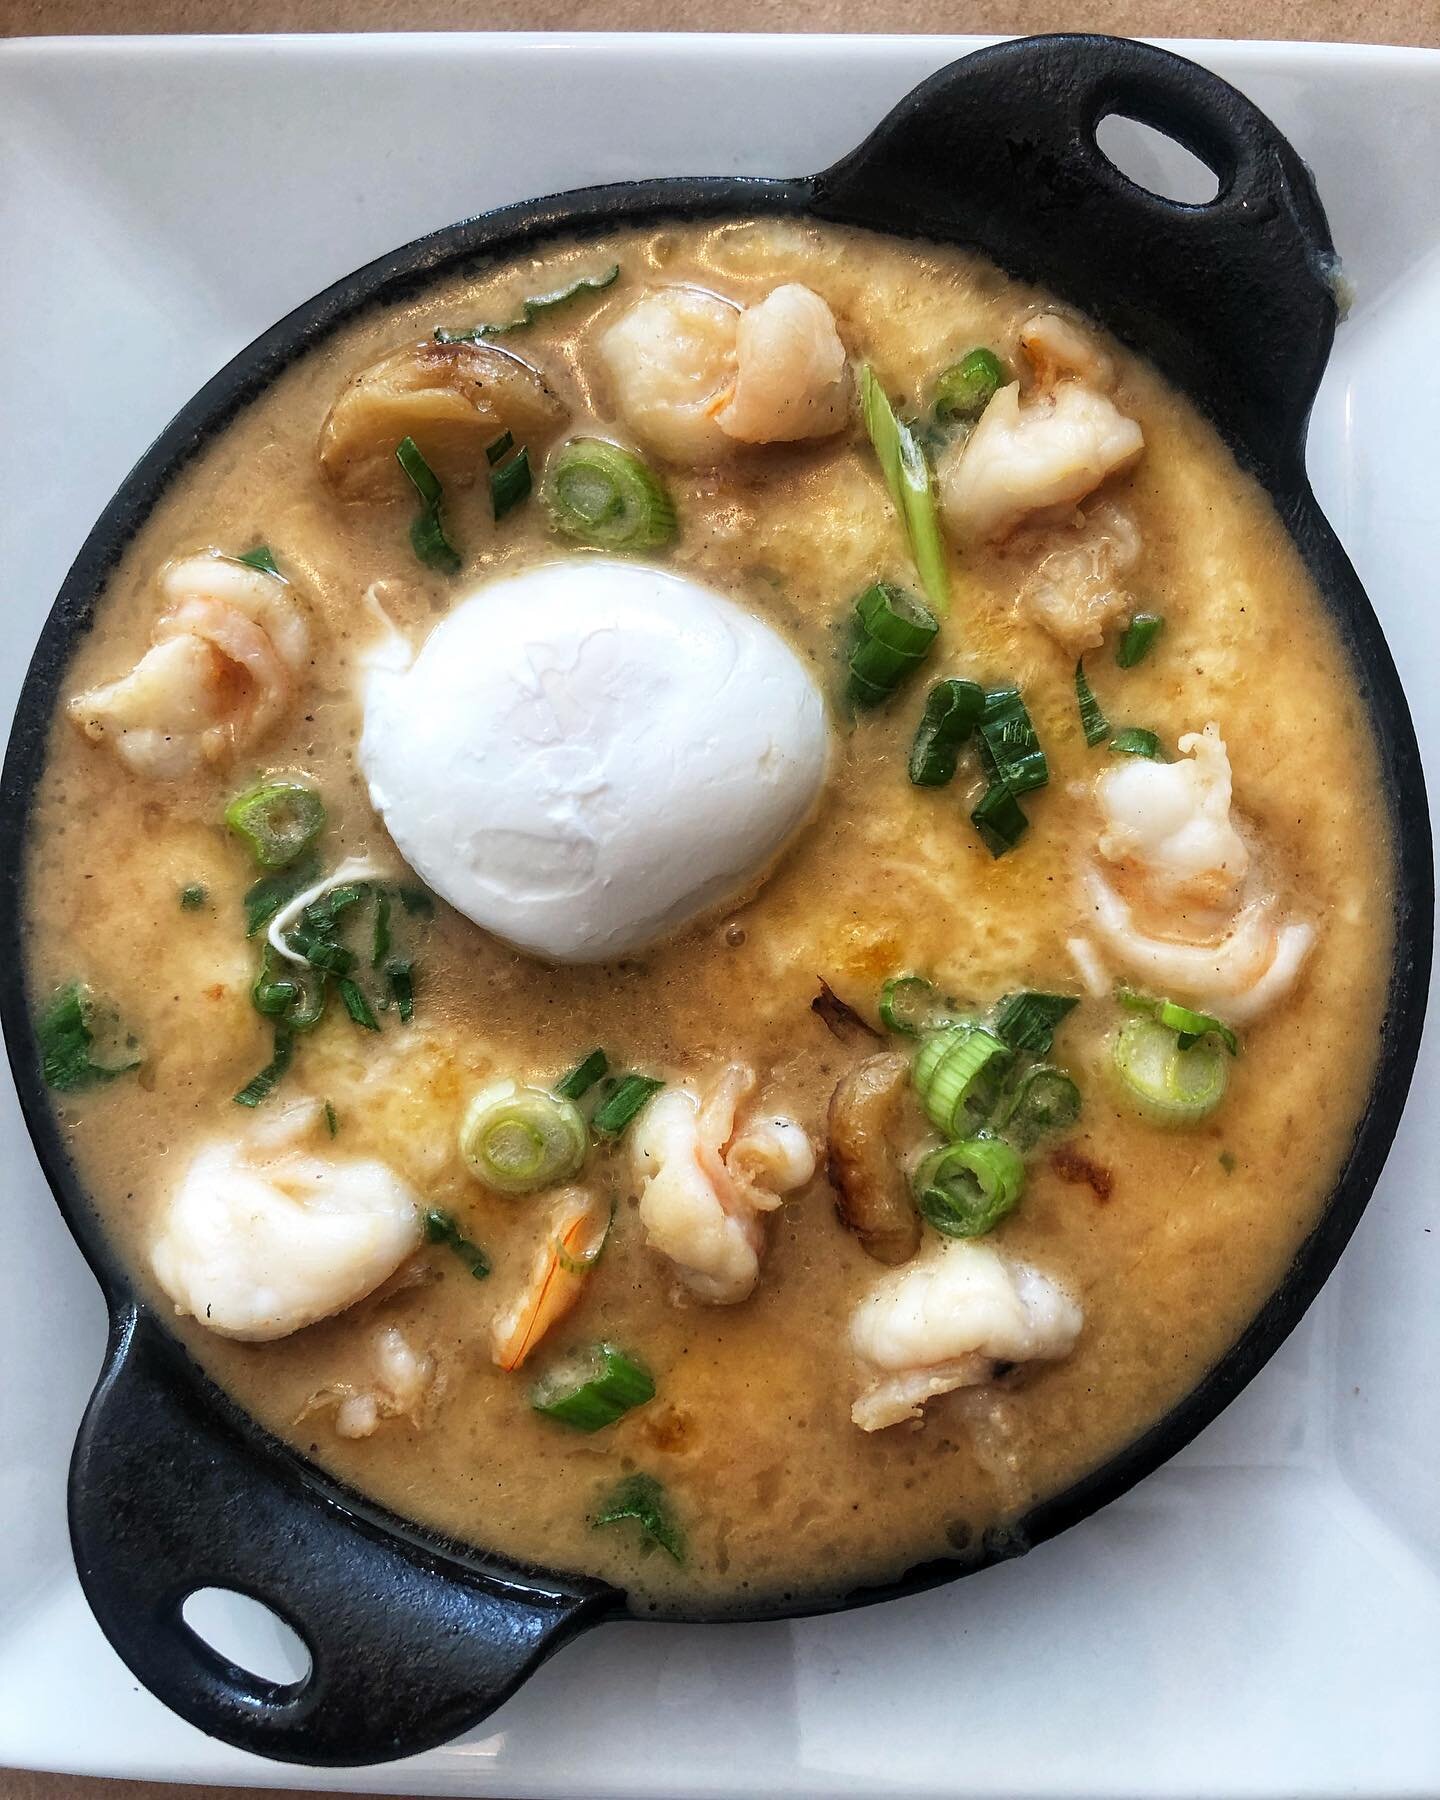 Brunch was five hours ago and I&rsquo;m still recovering 😵 Shrimp and grits is the best sedative, especially when it&rsquo;s so good you&rsquo;ve gotta eat the whole thing #theitisisreal